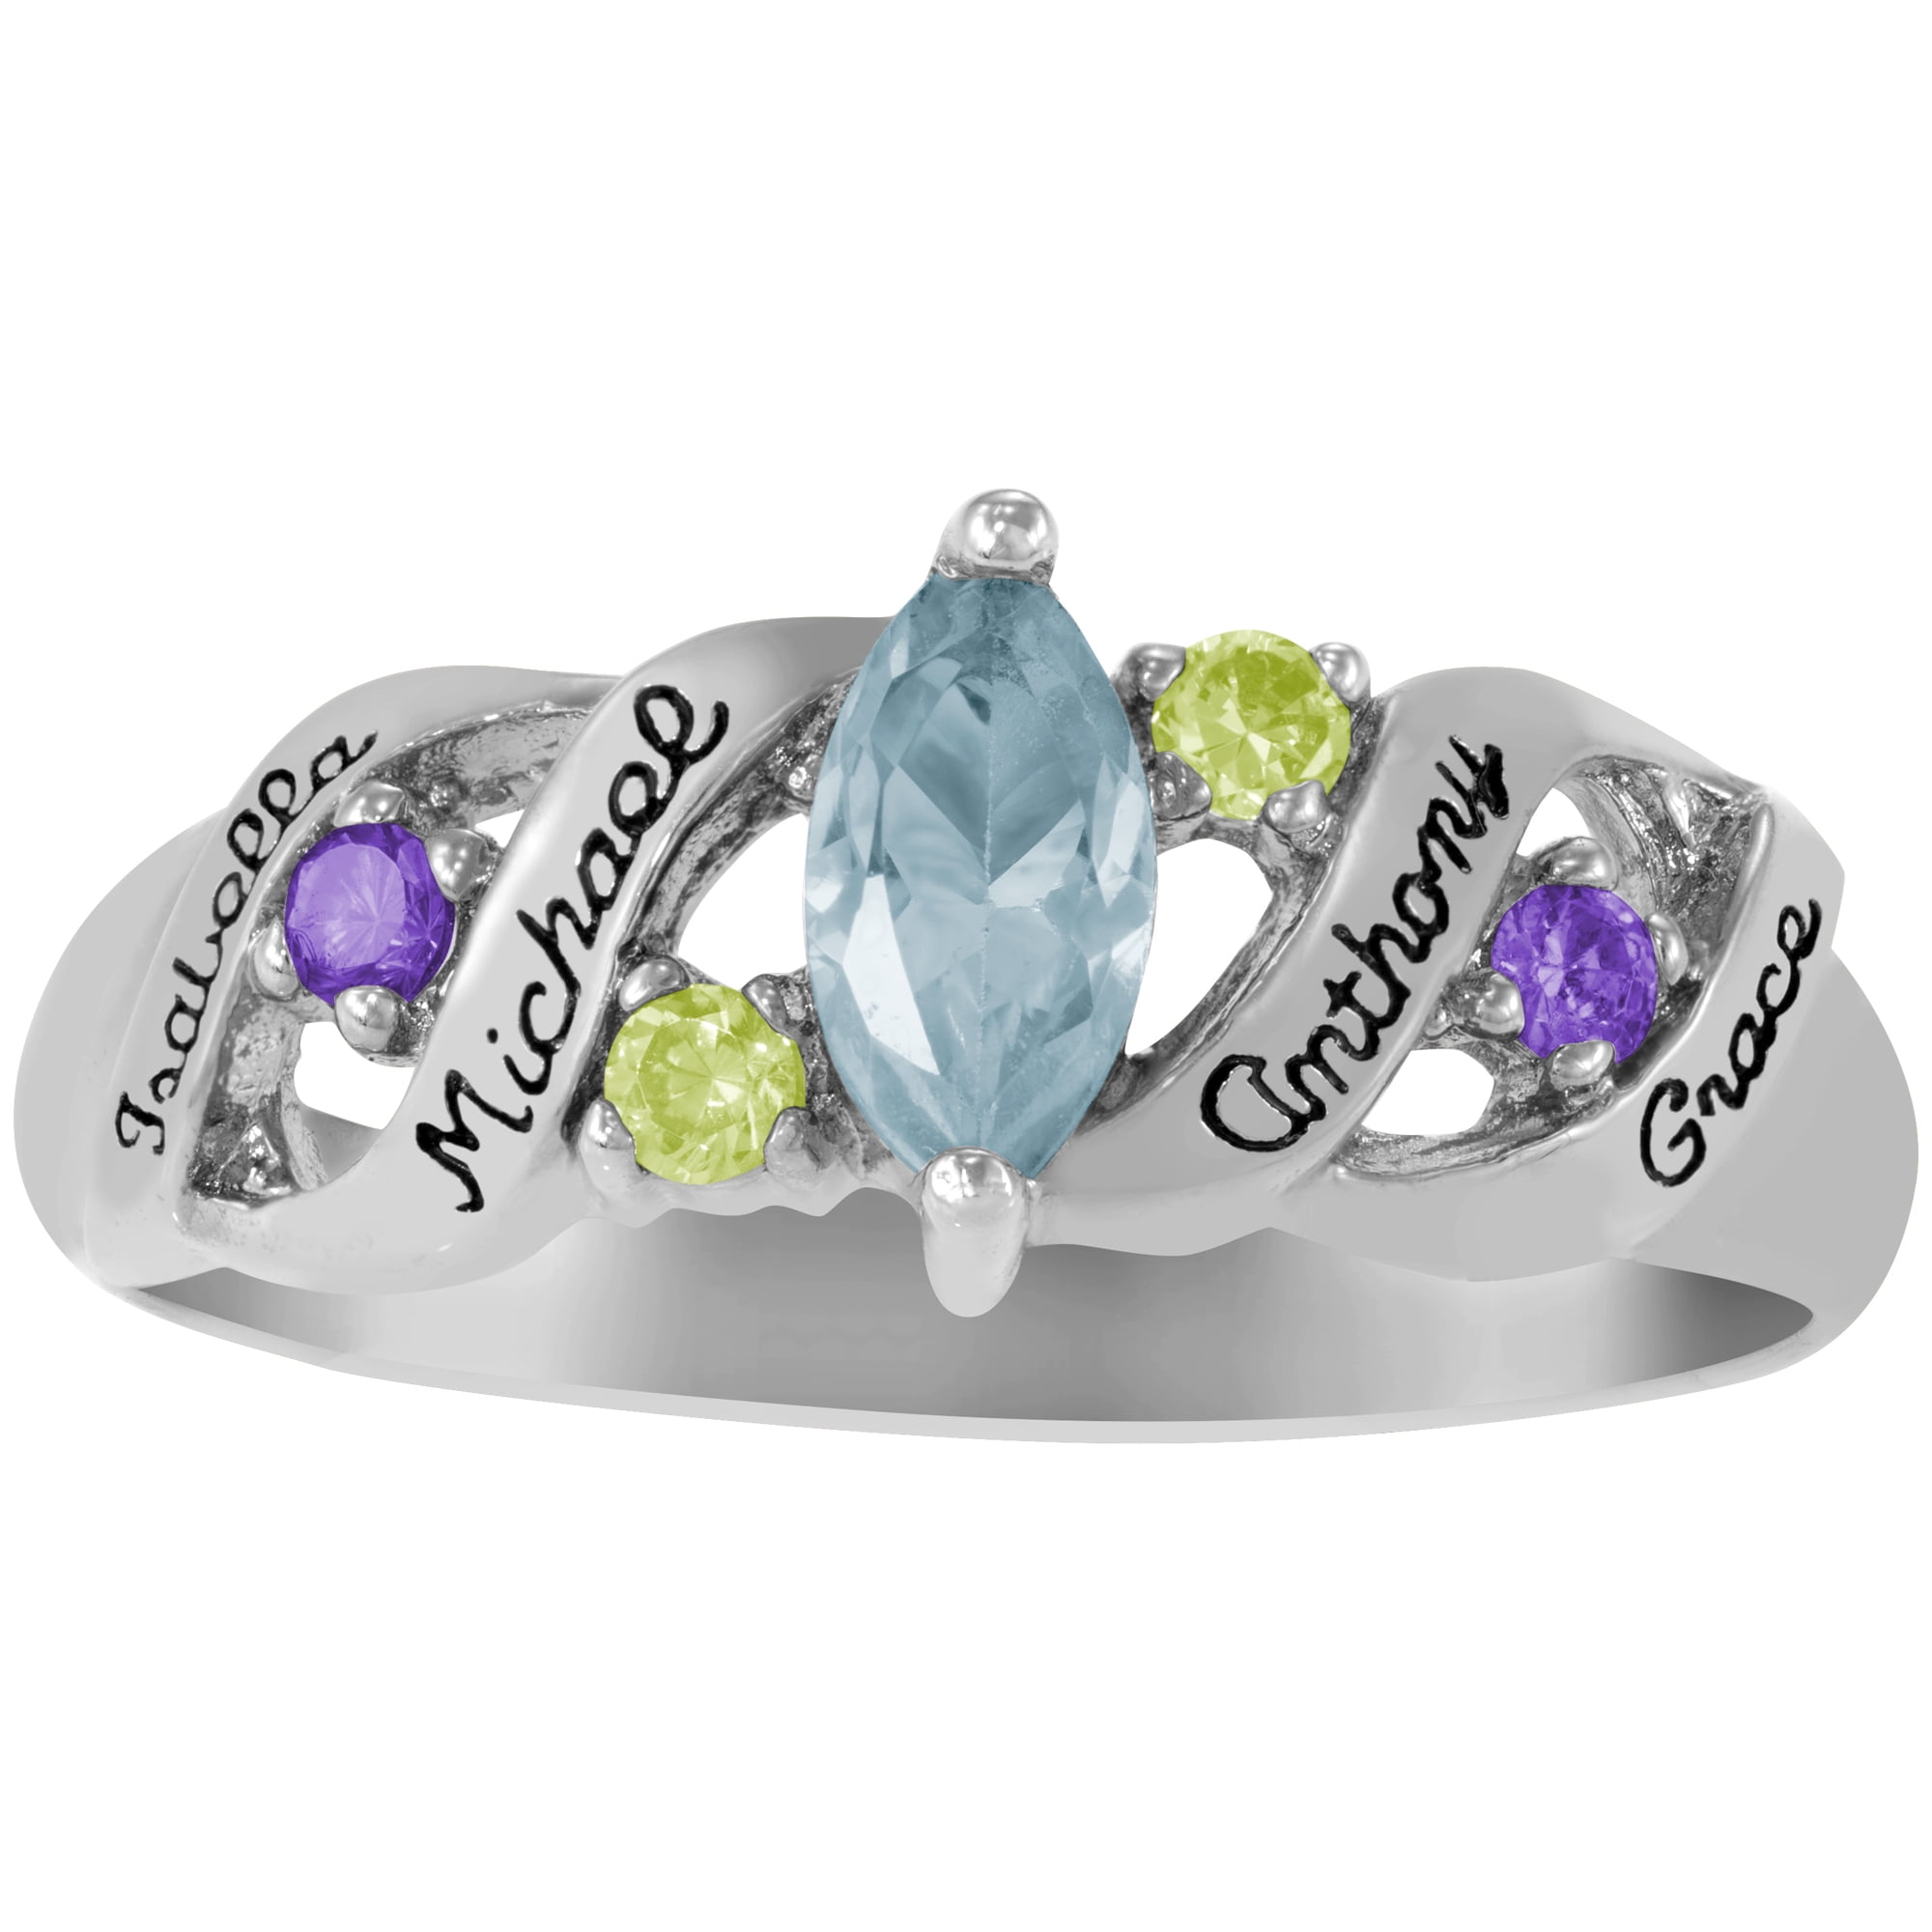 Keepsake Personalized Family Jewelry Ava Birthstone Mother's Ring